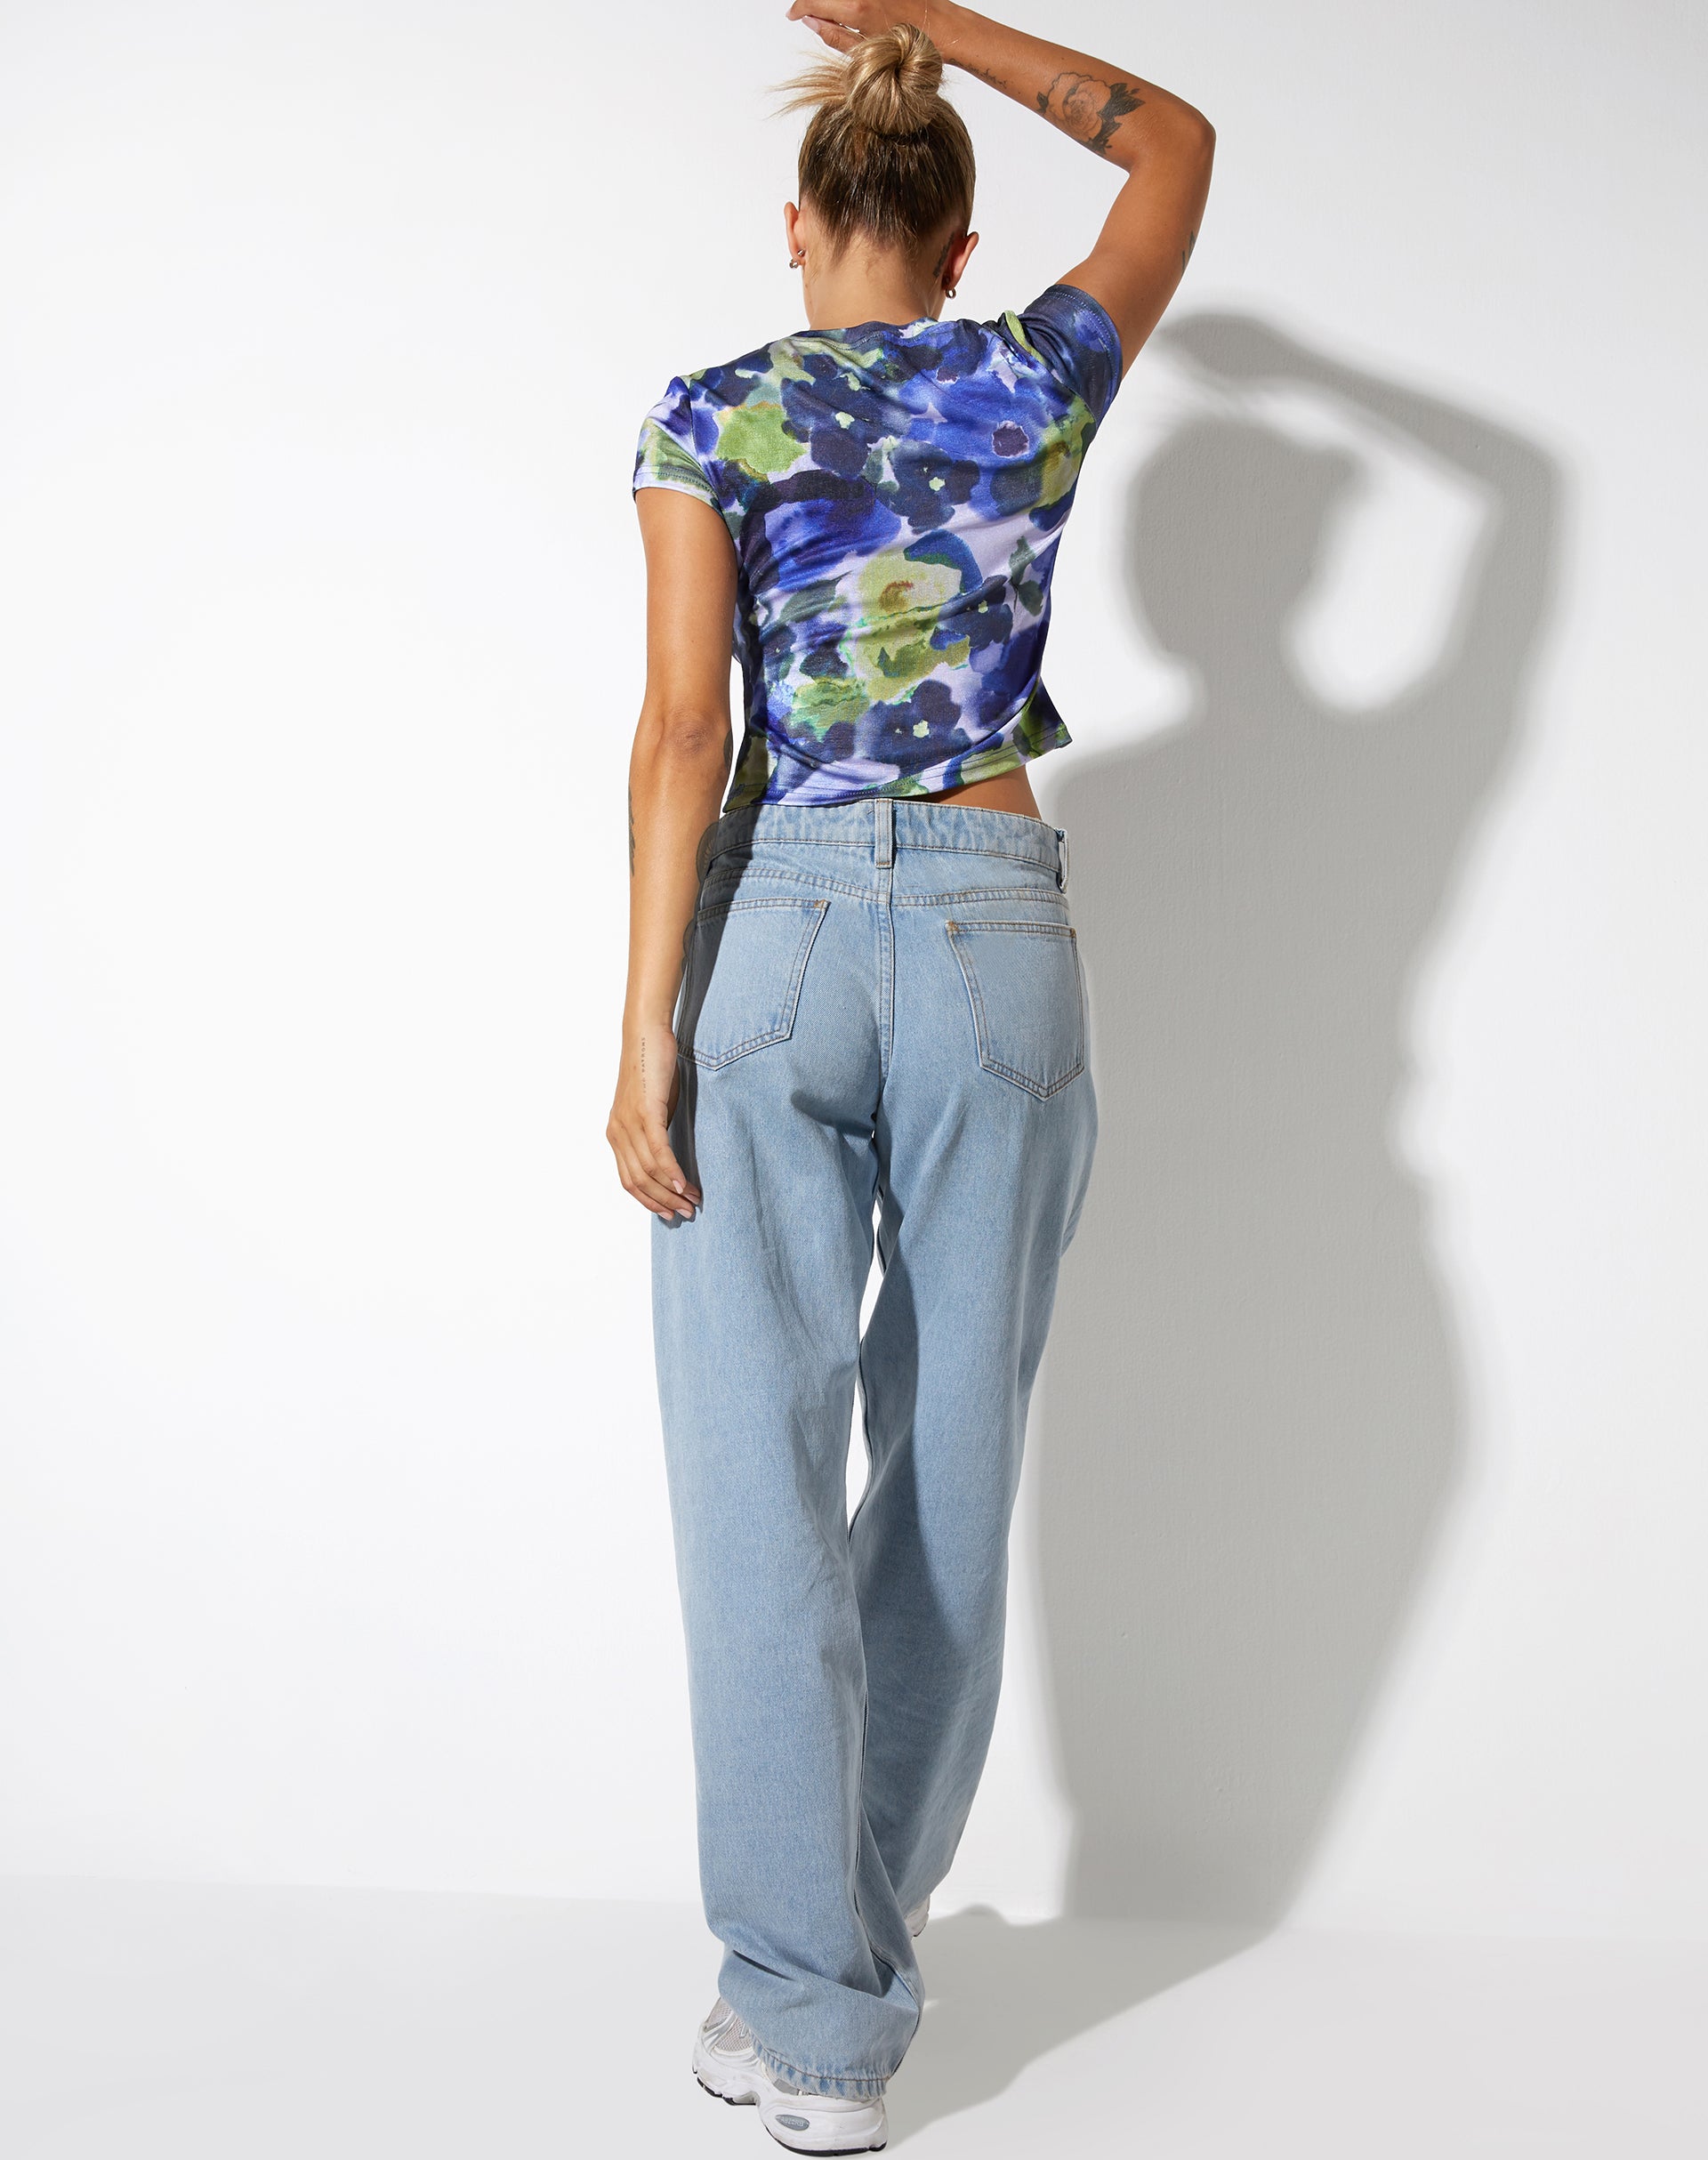 image of Sianda Crop Top in Abstract Watercolour Blue